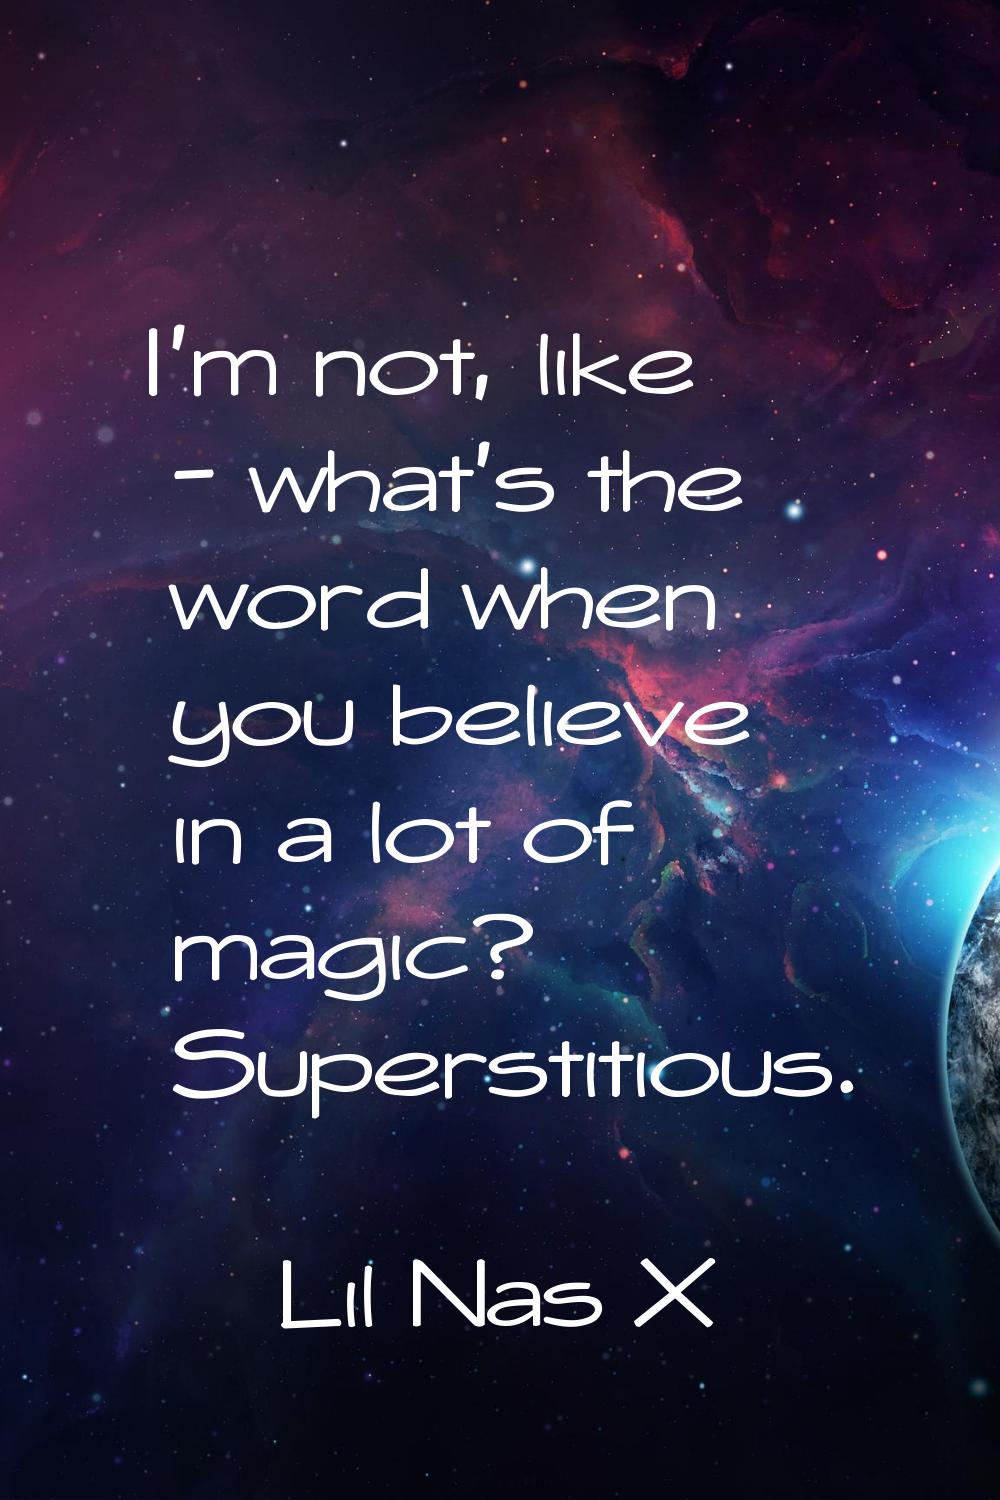 I'm not, like - what's the word when you believe in a lot of magic? Superstitious.